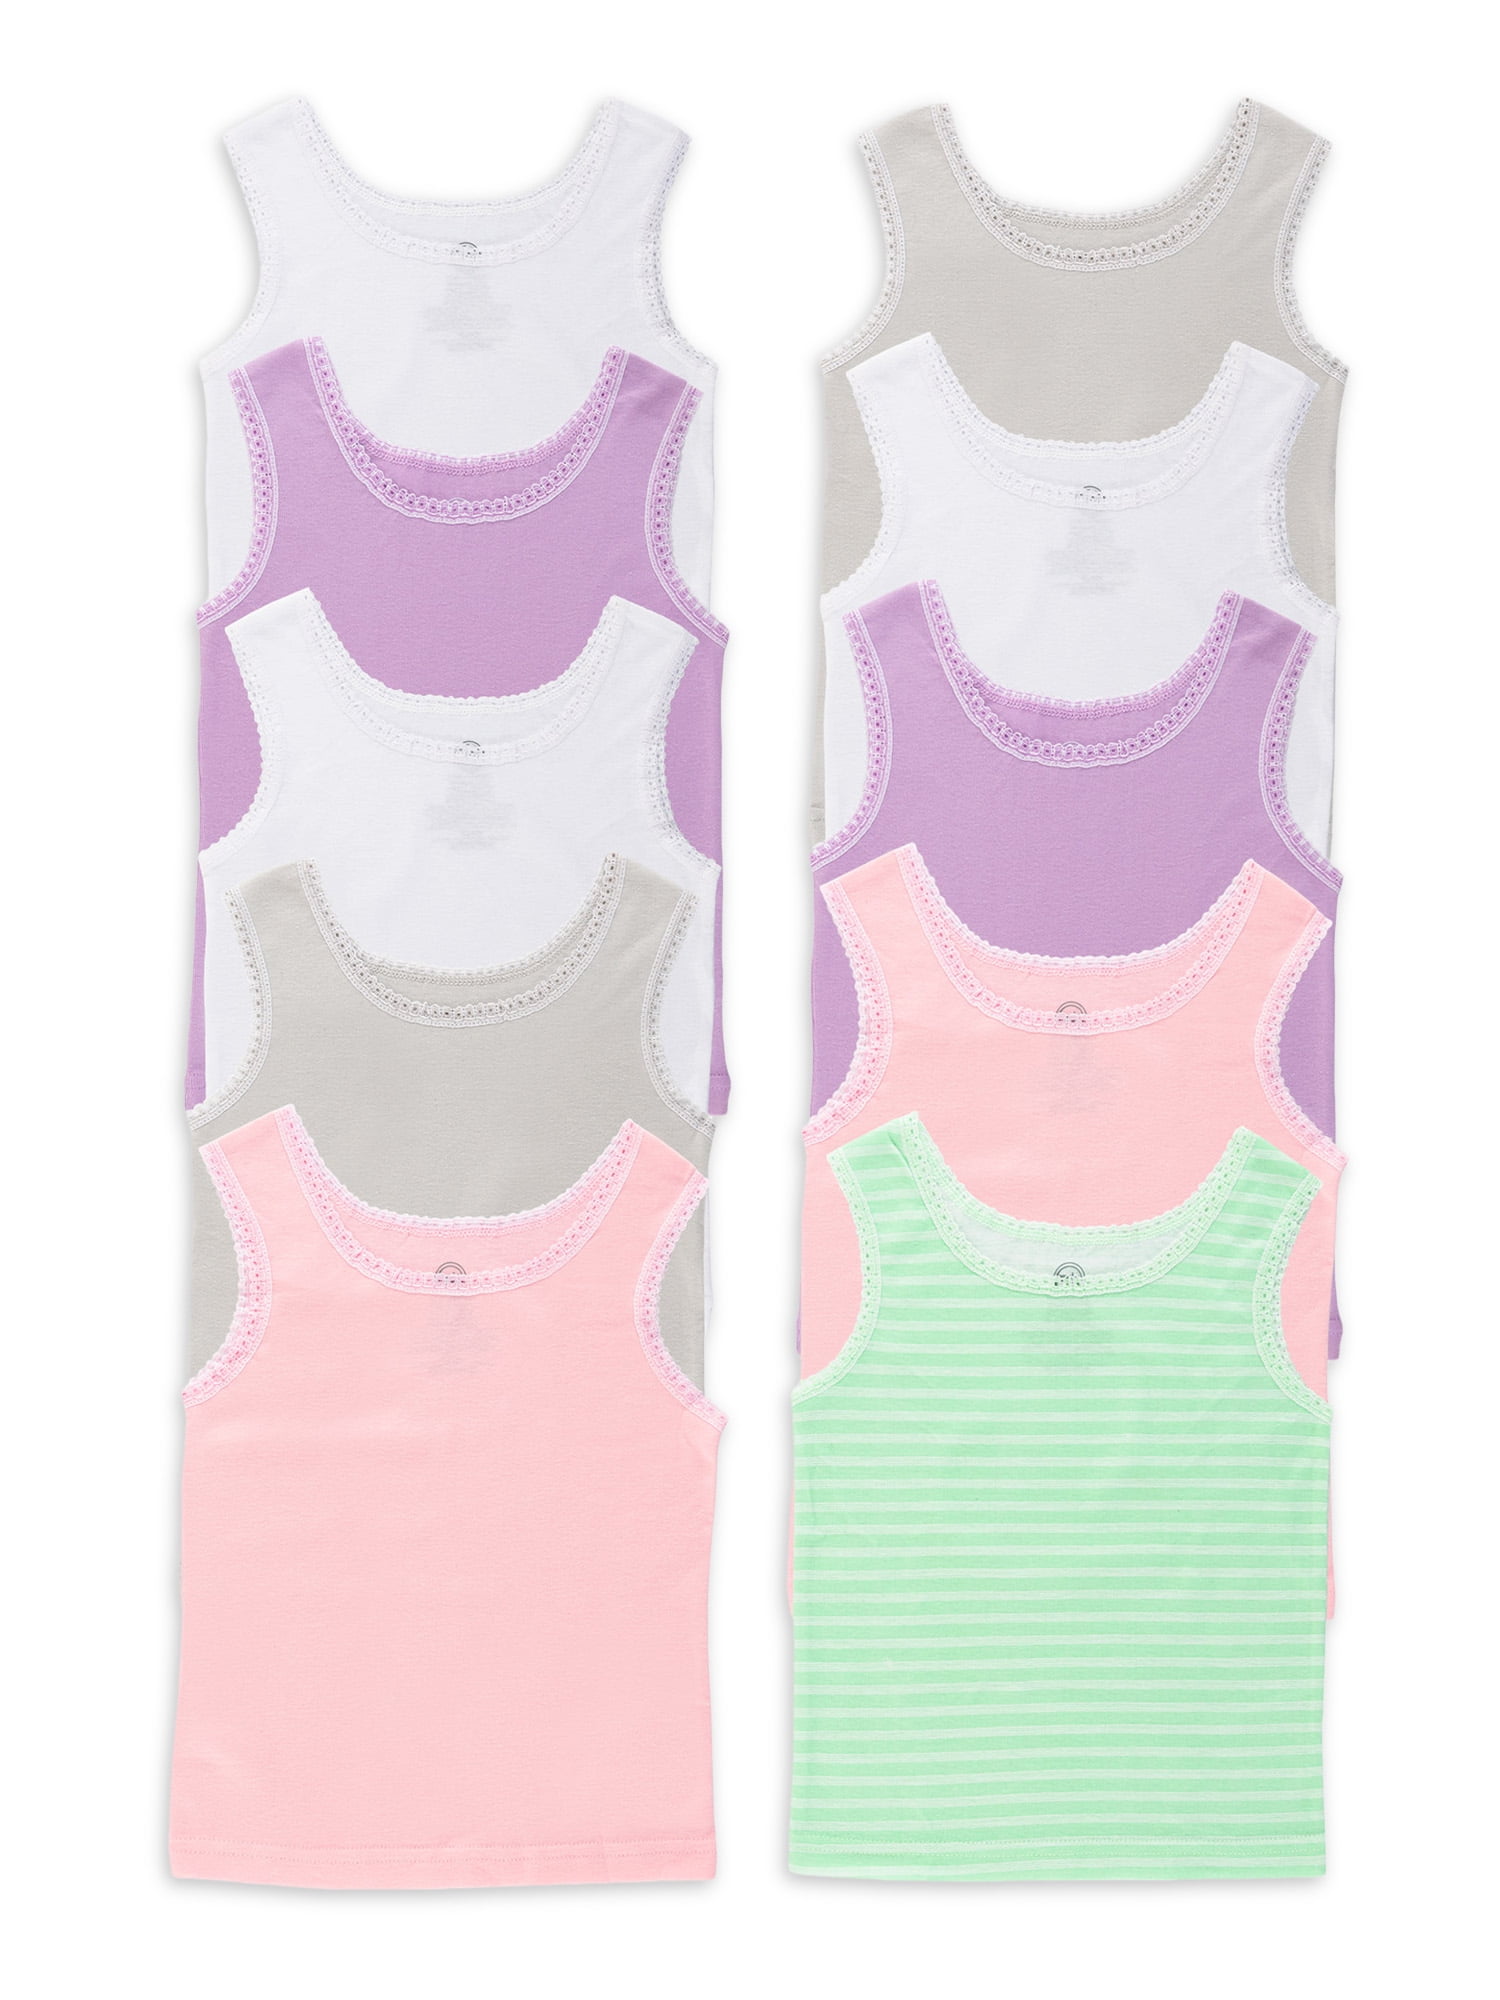 Camisole Vests 3 Pairs Pack 100% Cotton 3 to 10 YRS Girls Sleeveless Short Crop 